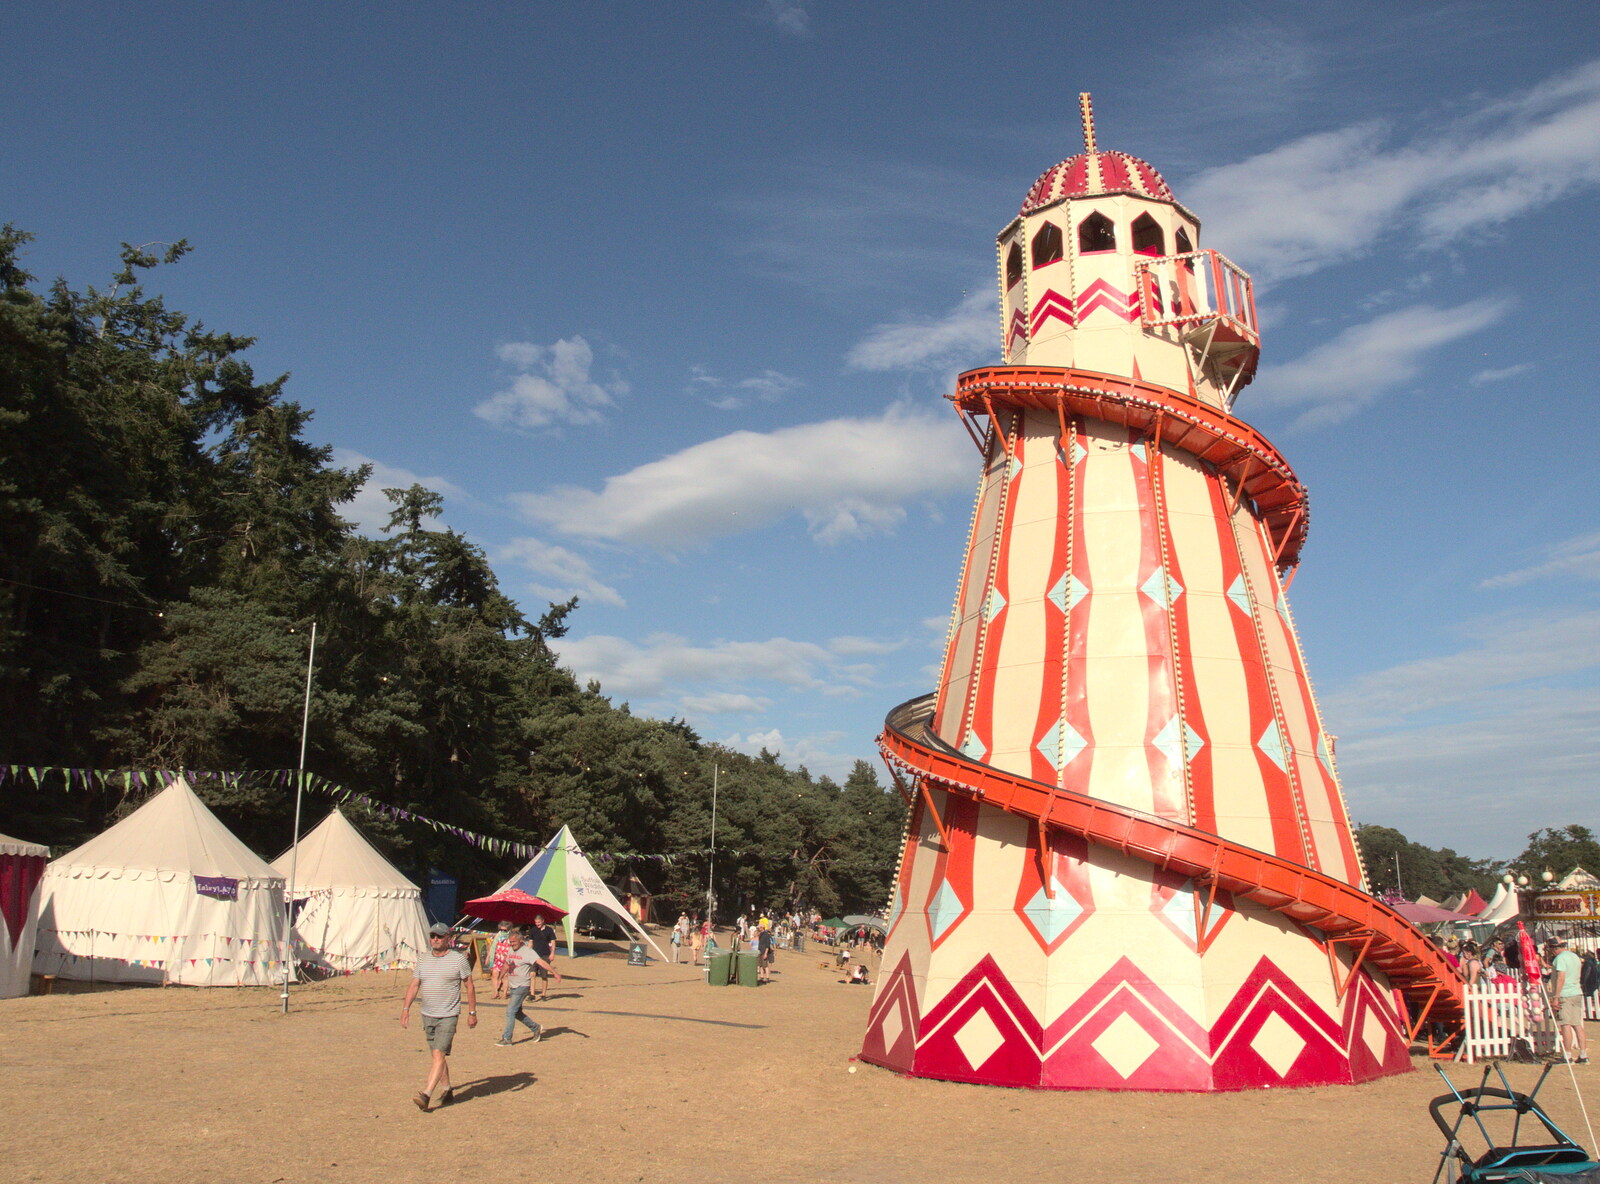 A Day at Latitude, Henham Park, Suffolk - 24th July 2022: Another view of the Helter Skelter